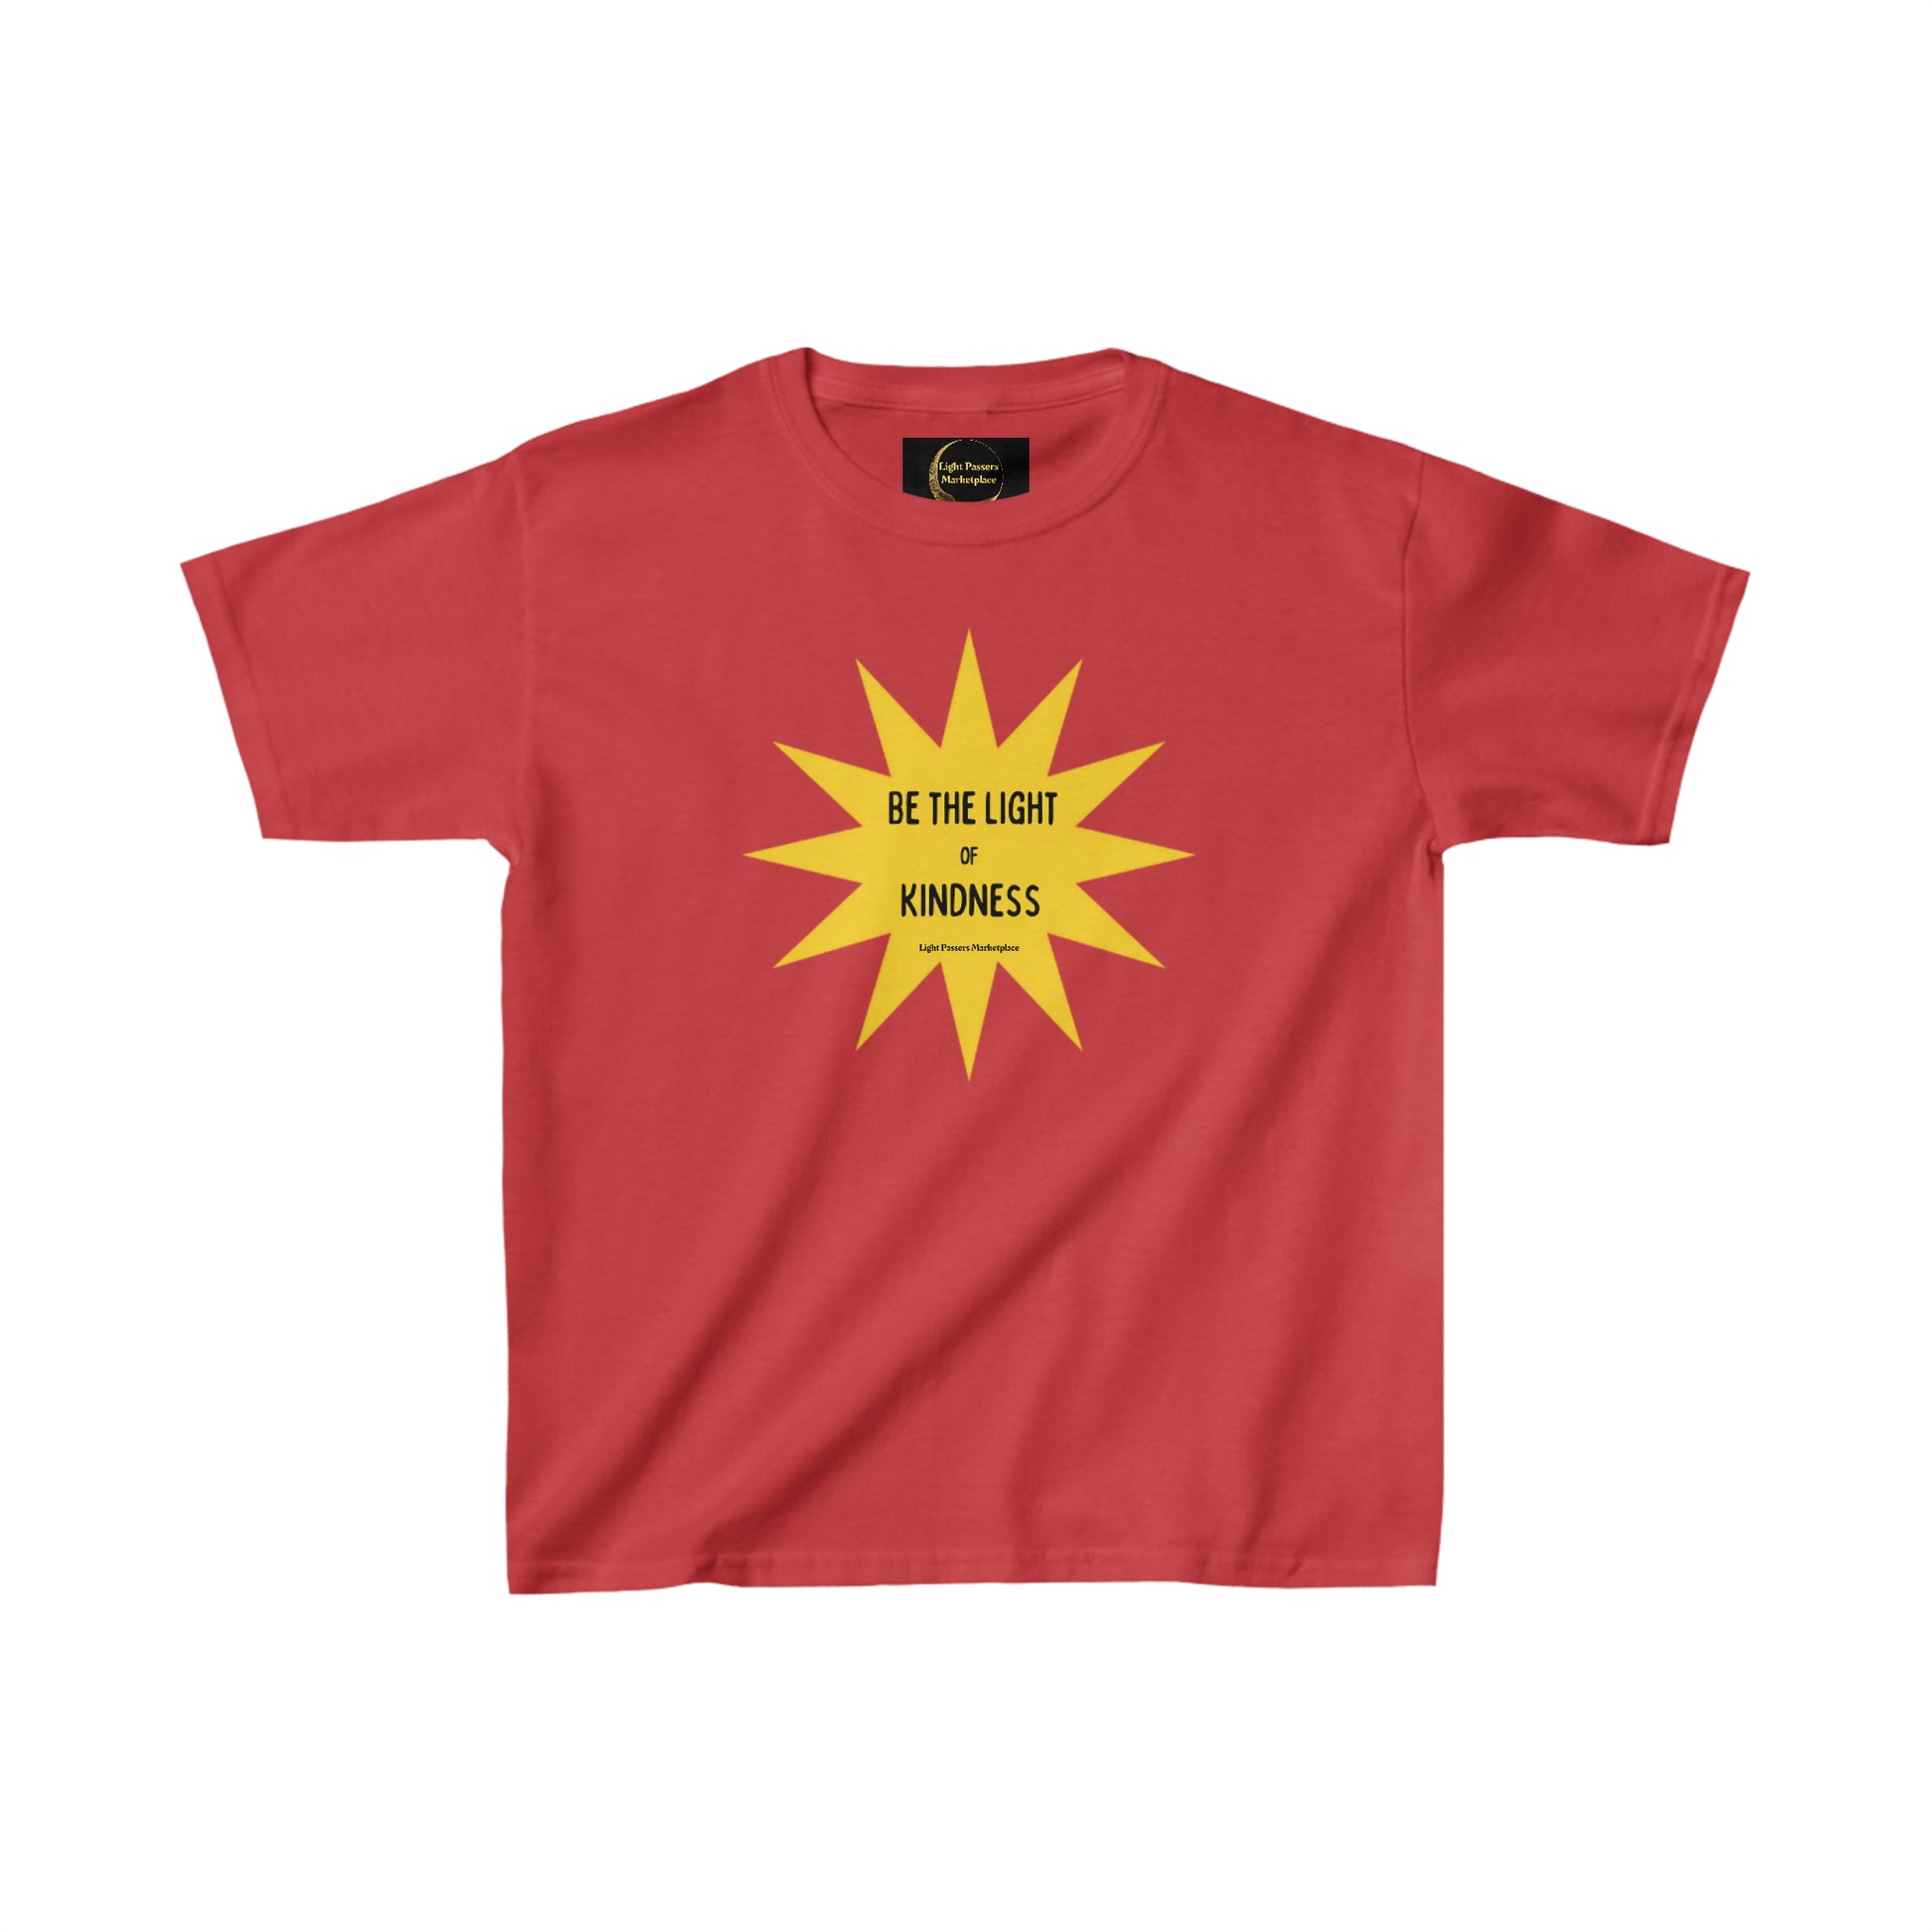 Youth cotton T-shirt featuring a yellow star design. Made of 100% cotton with twill tape shoulders for durability. Ribbed collar, tear-away label, and no side seams.